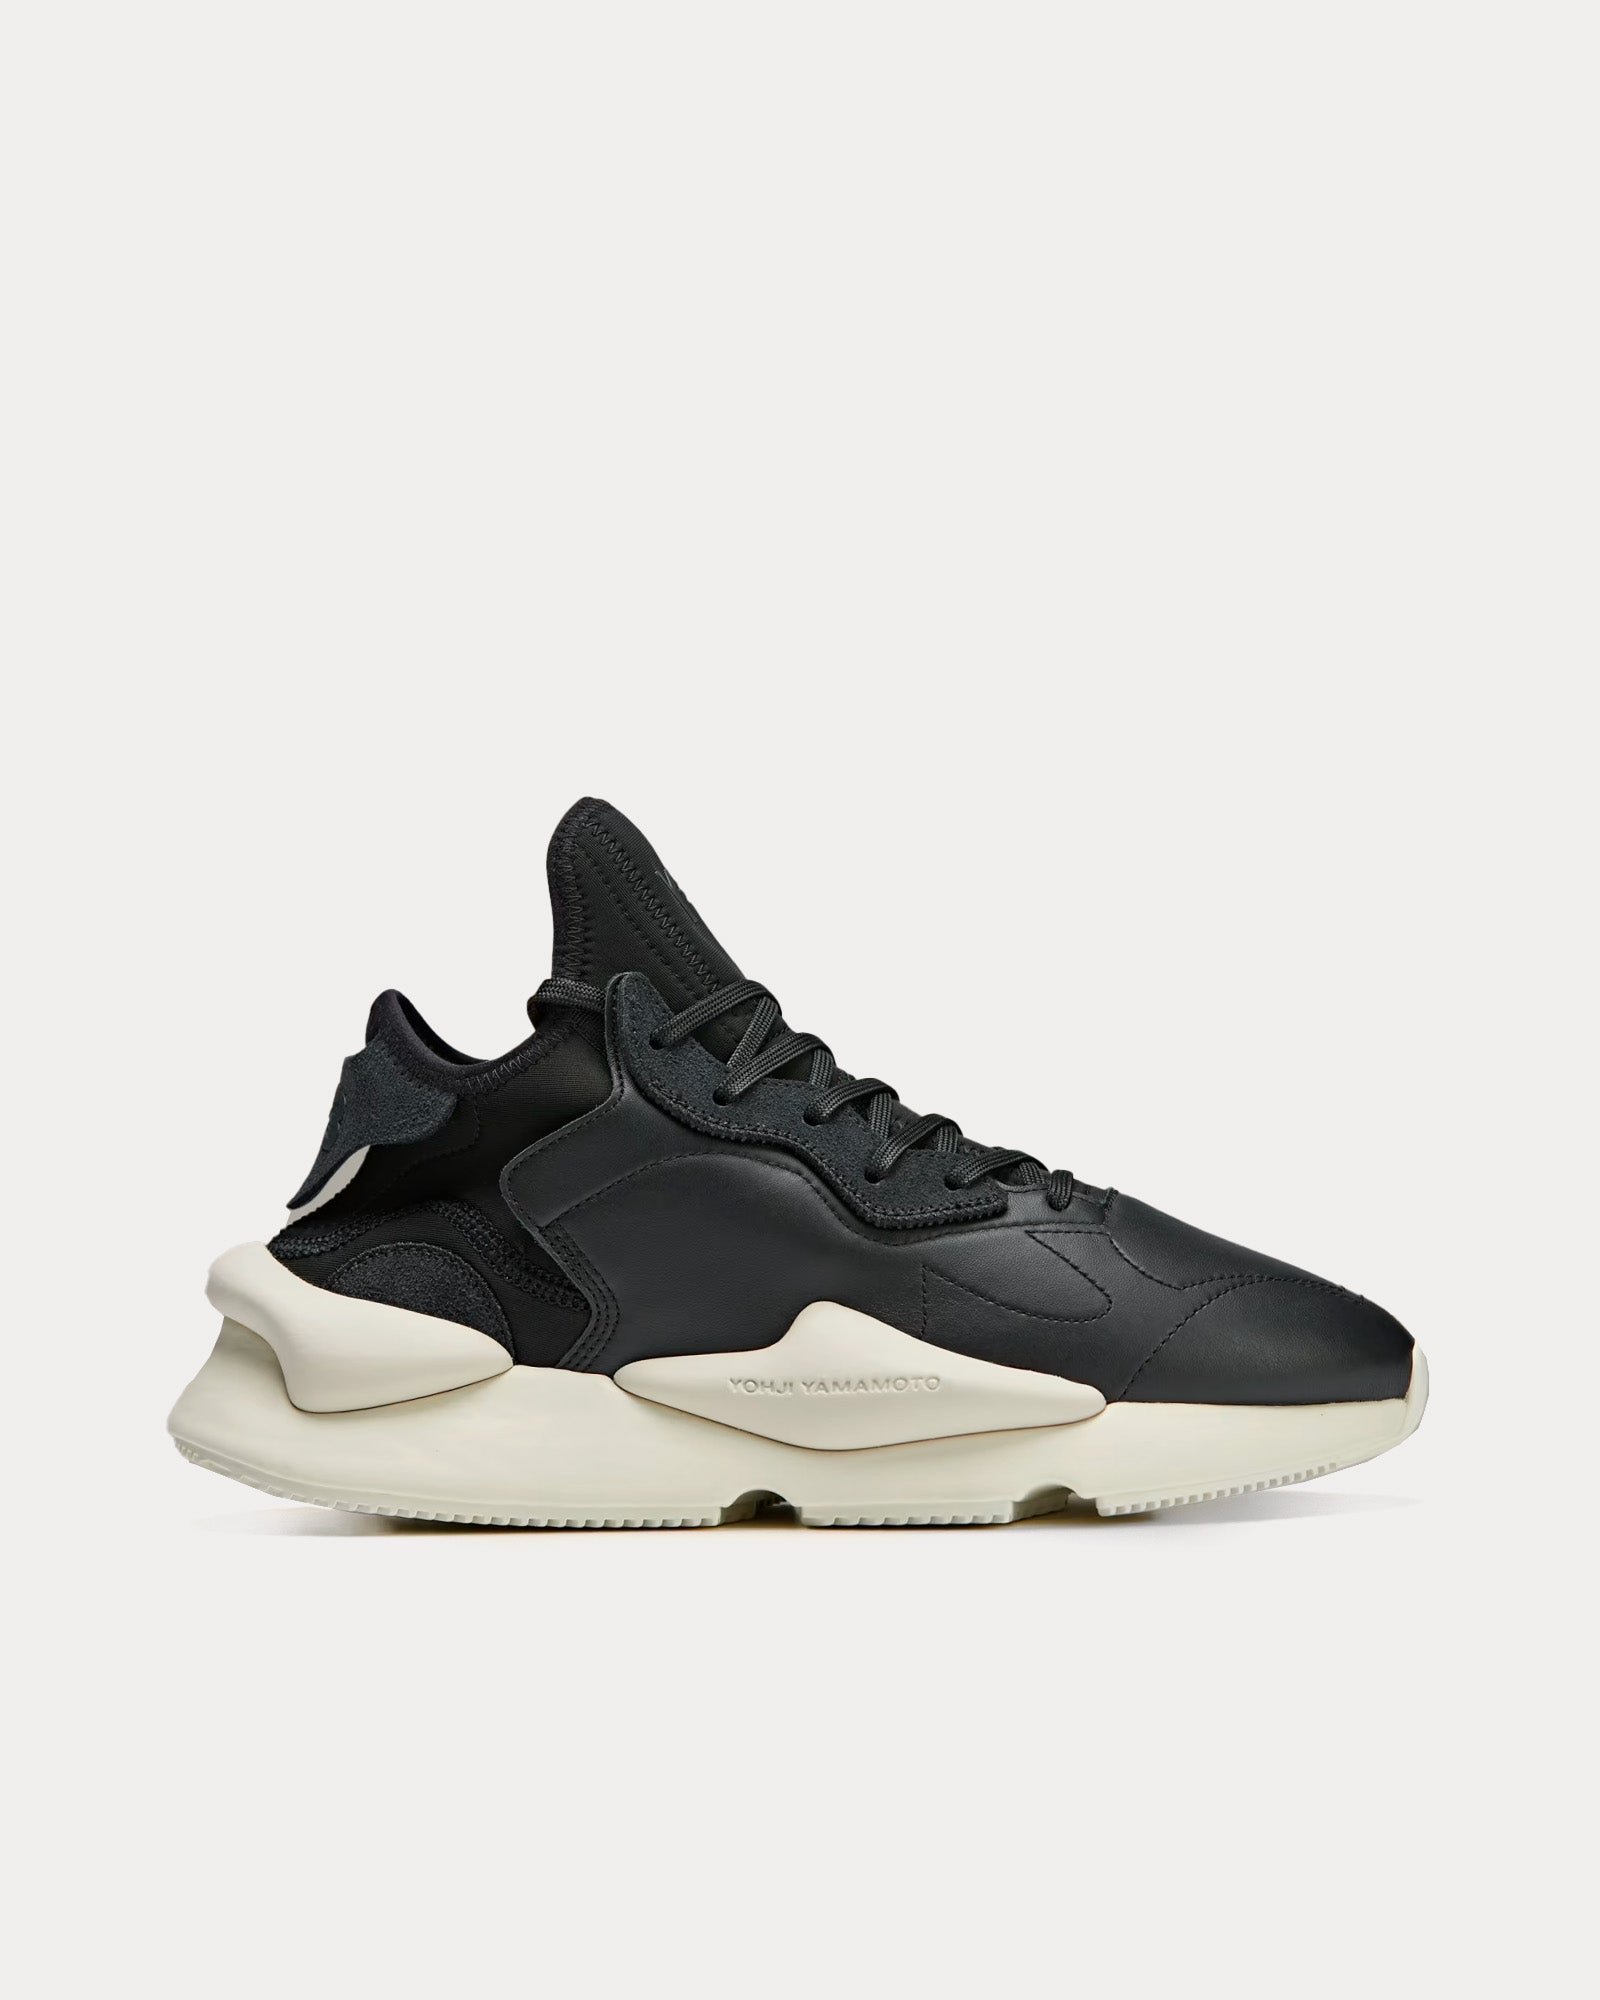 Y-3 - Kaiwa Black / Off White / Bliss Mid Top Sneakers